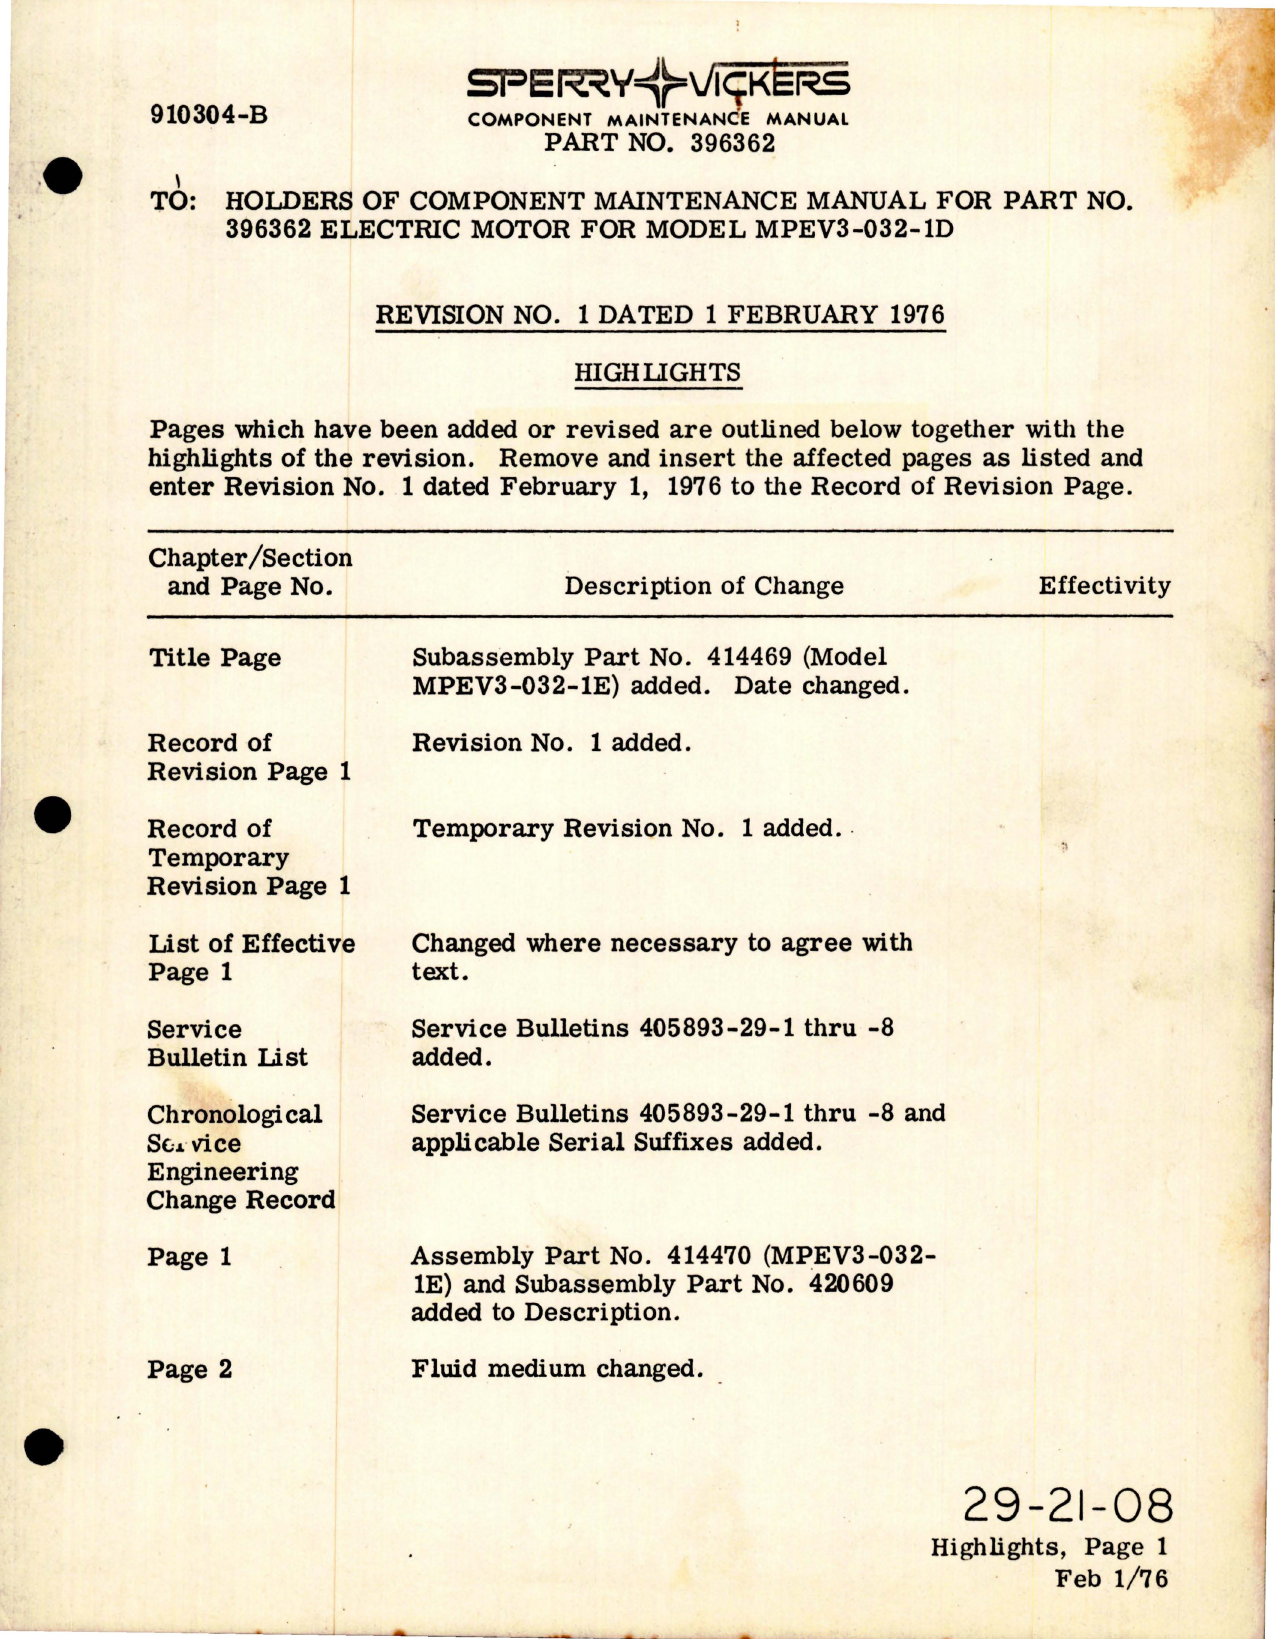 Sample page 1 from AirCorps Library document: Component Maintenance Manual for Electric Motor - Part 396362 - Model MPEV3-032-1D - Revision No. 1  